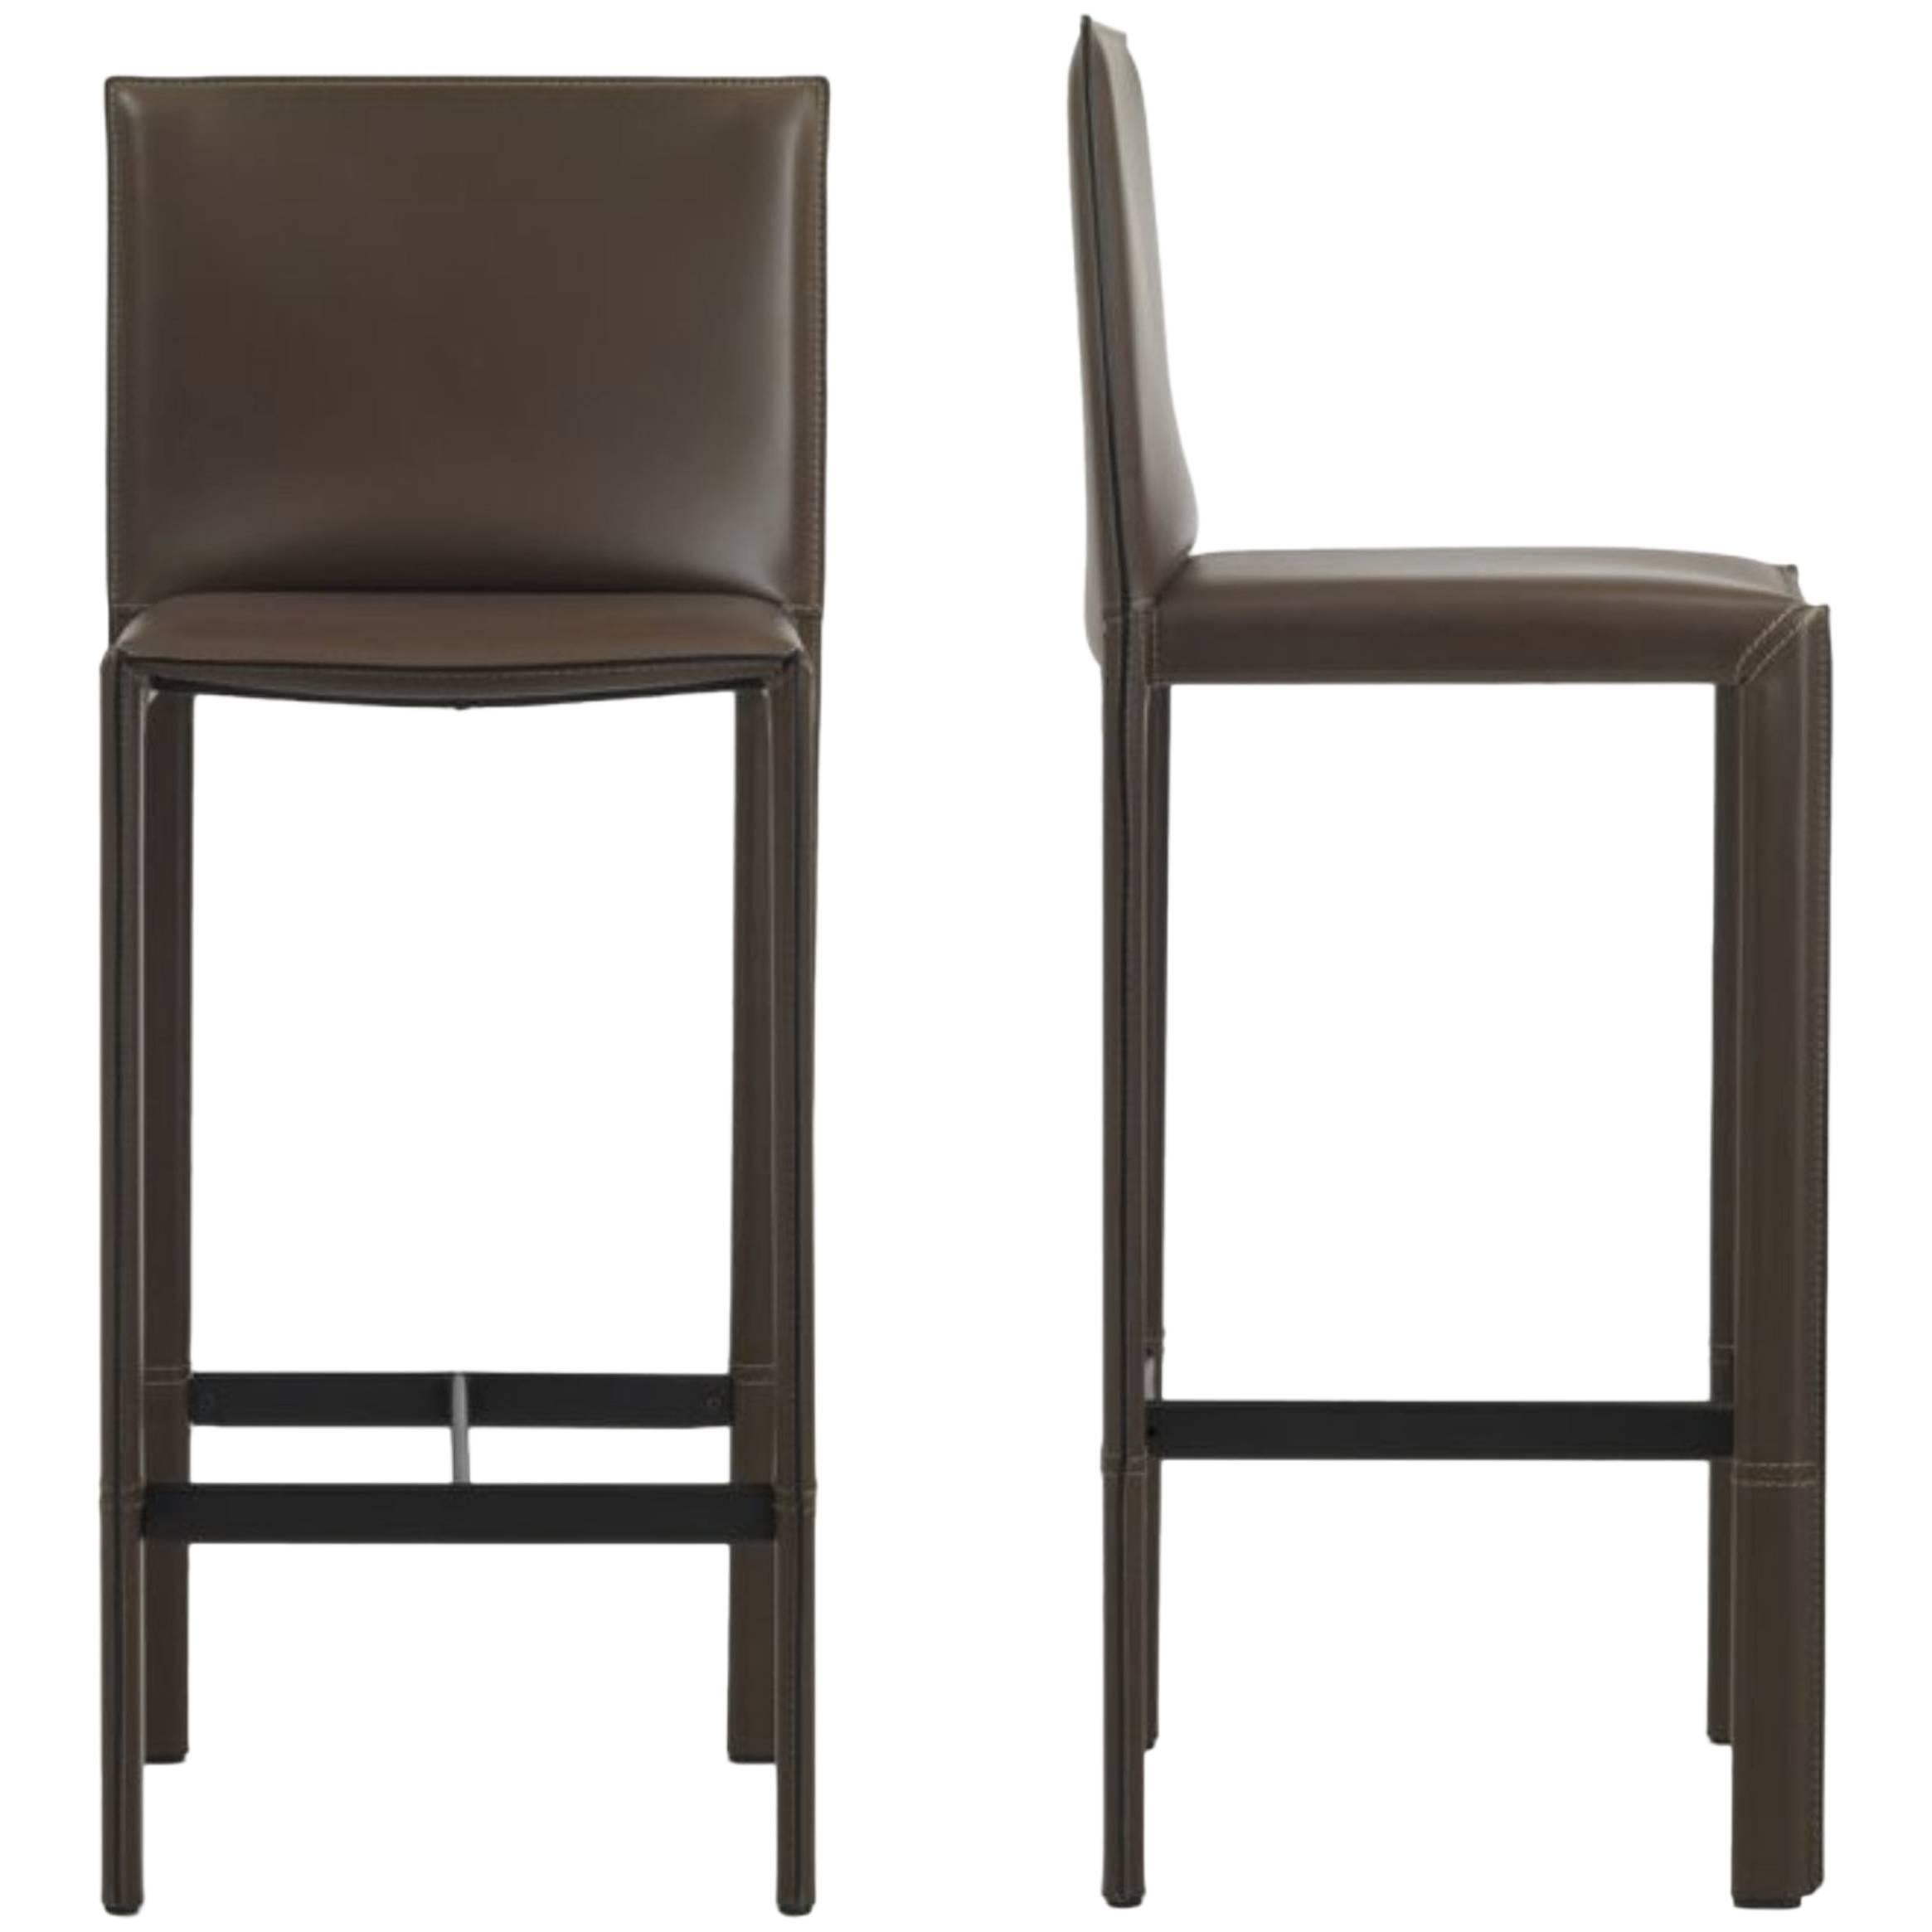 Italian Modern Leather Bar Stools Made in Italy For Sale